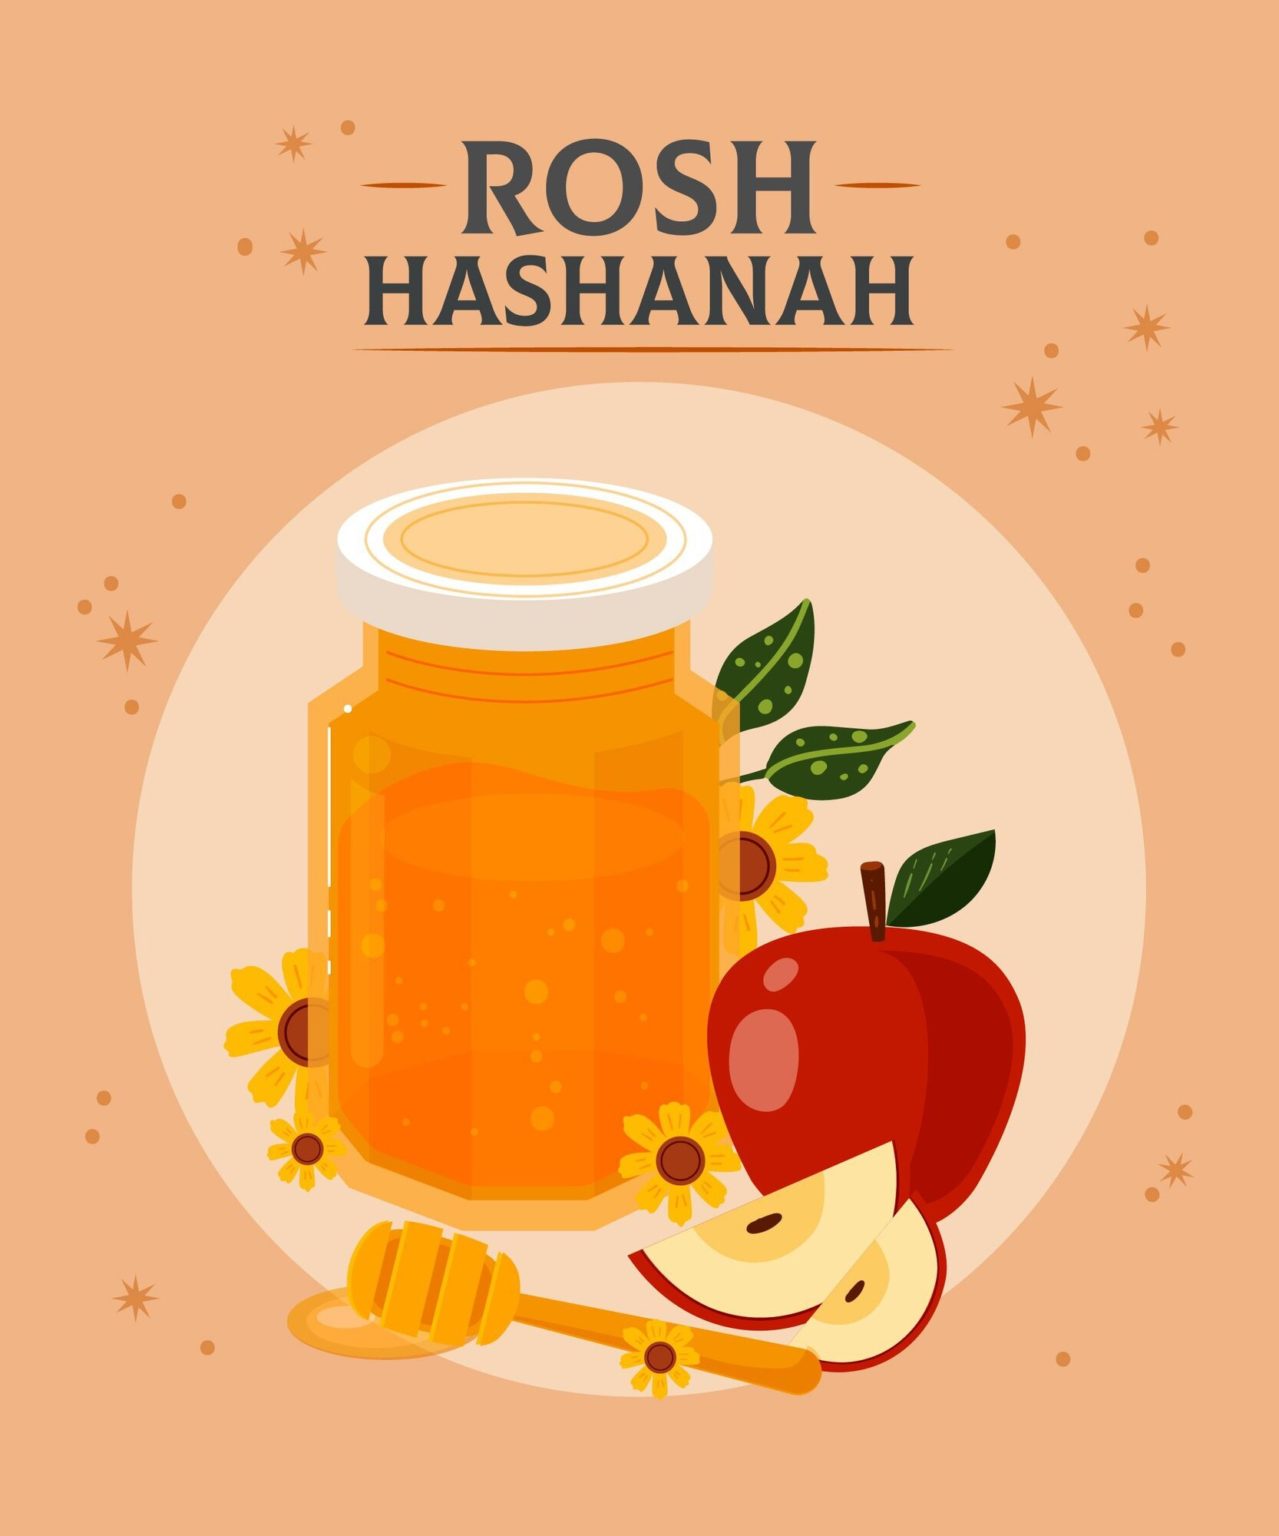 rosh-hashanah-2022-greetings-wishes-quotes-images-messages-slogans